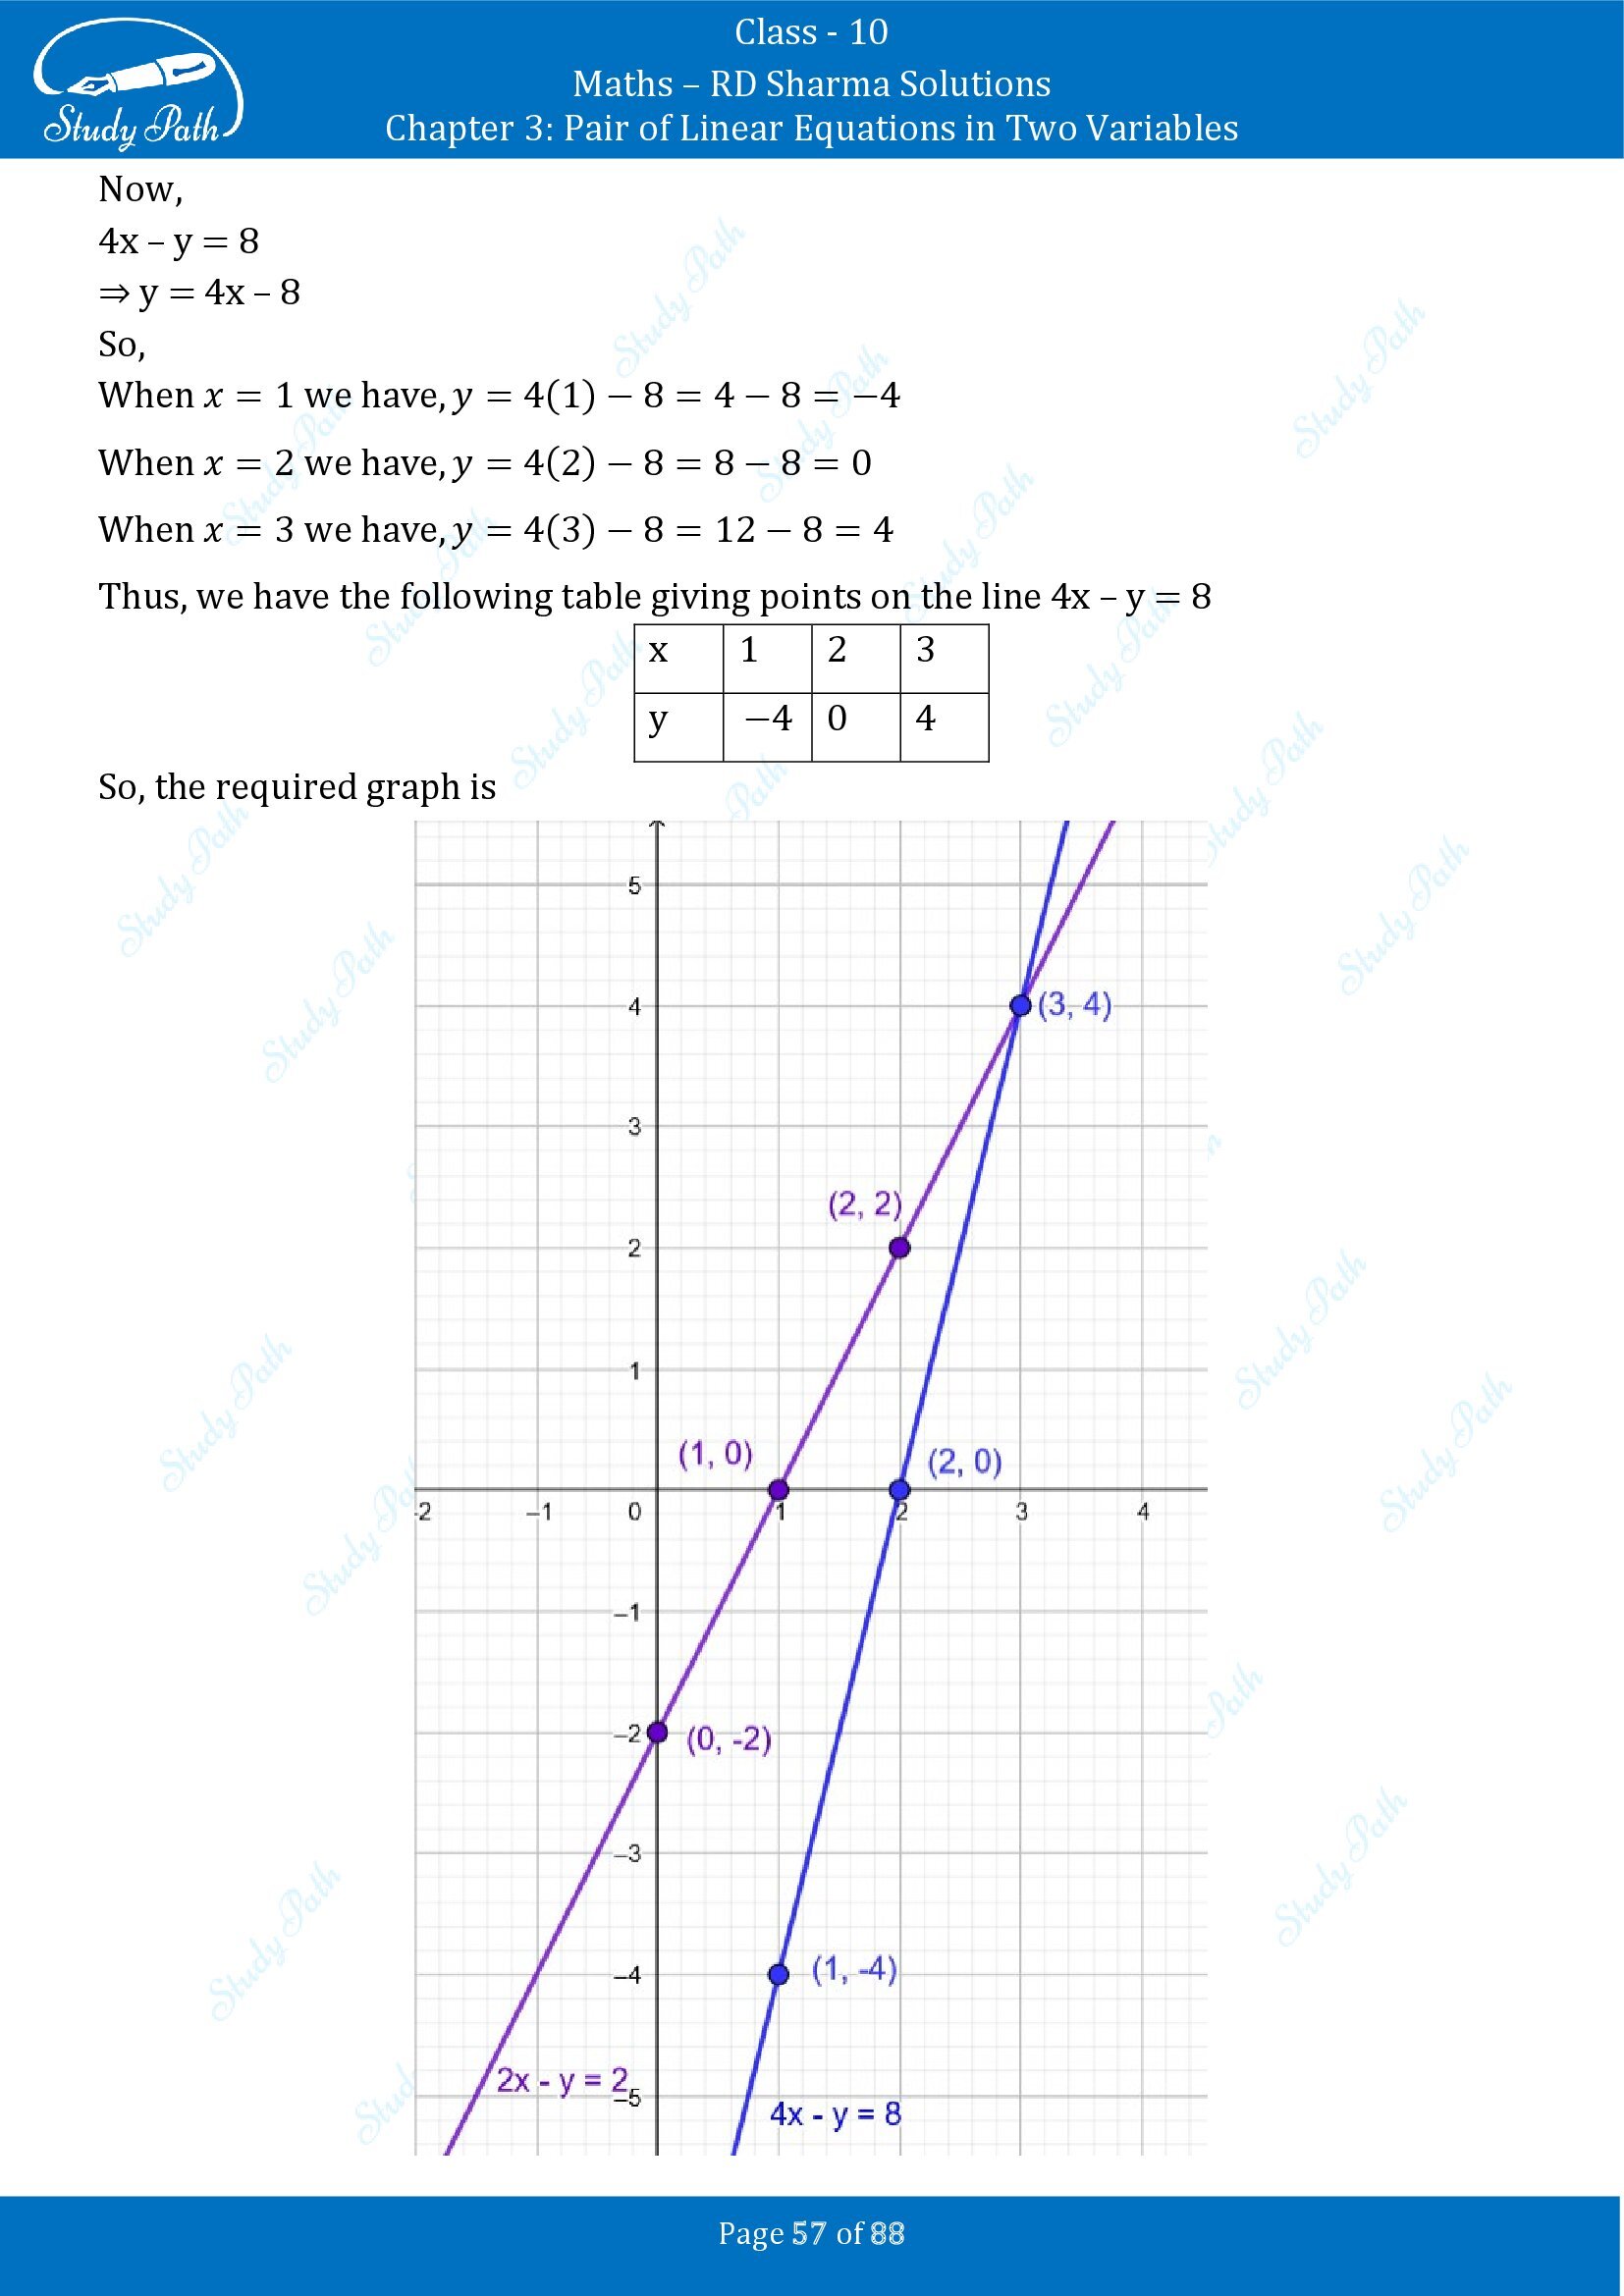 RD Sharma Solutions Class 10 Chapter 3 Pair of Linear Equations in Two Variables Exercise 3.2 00057